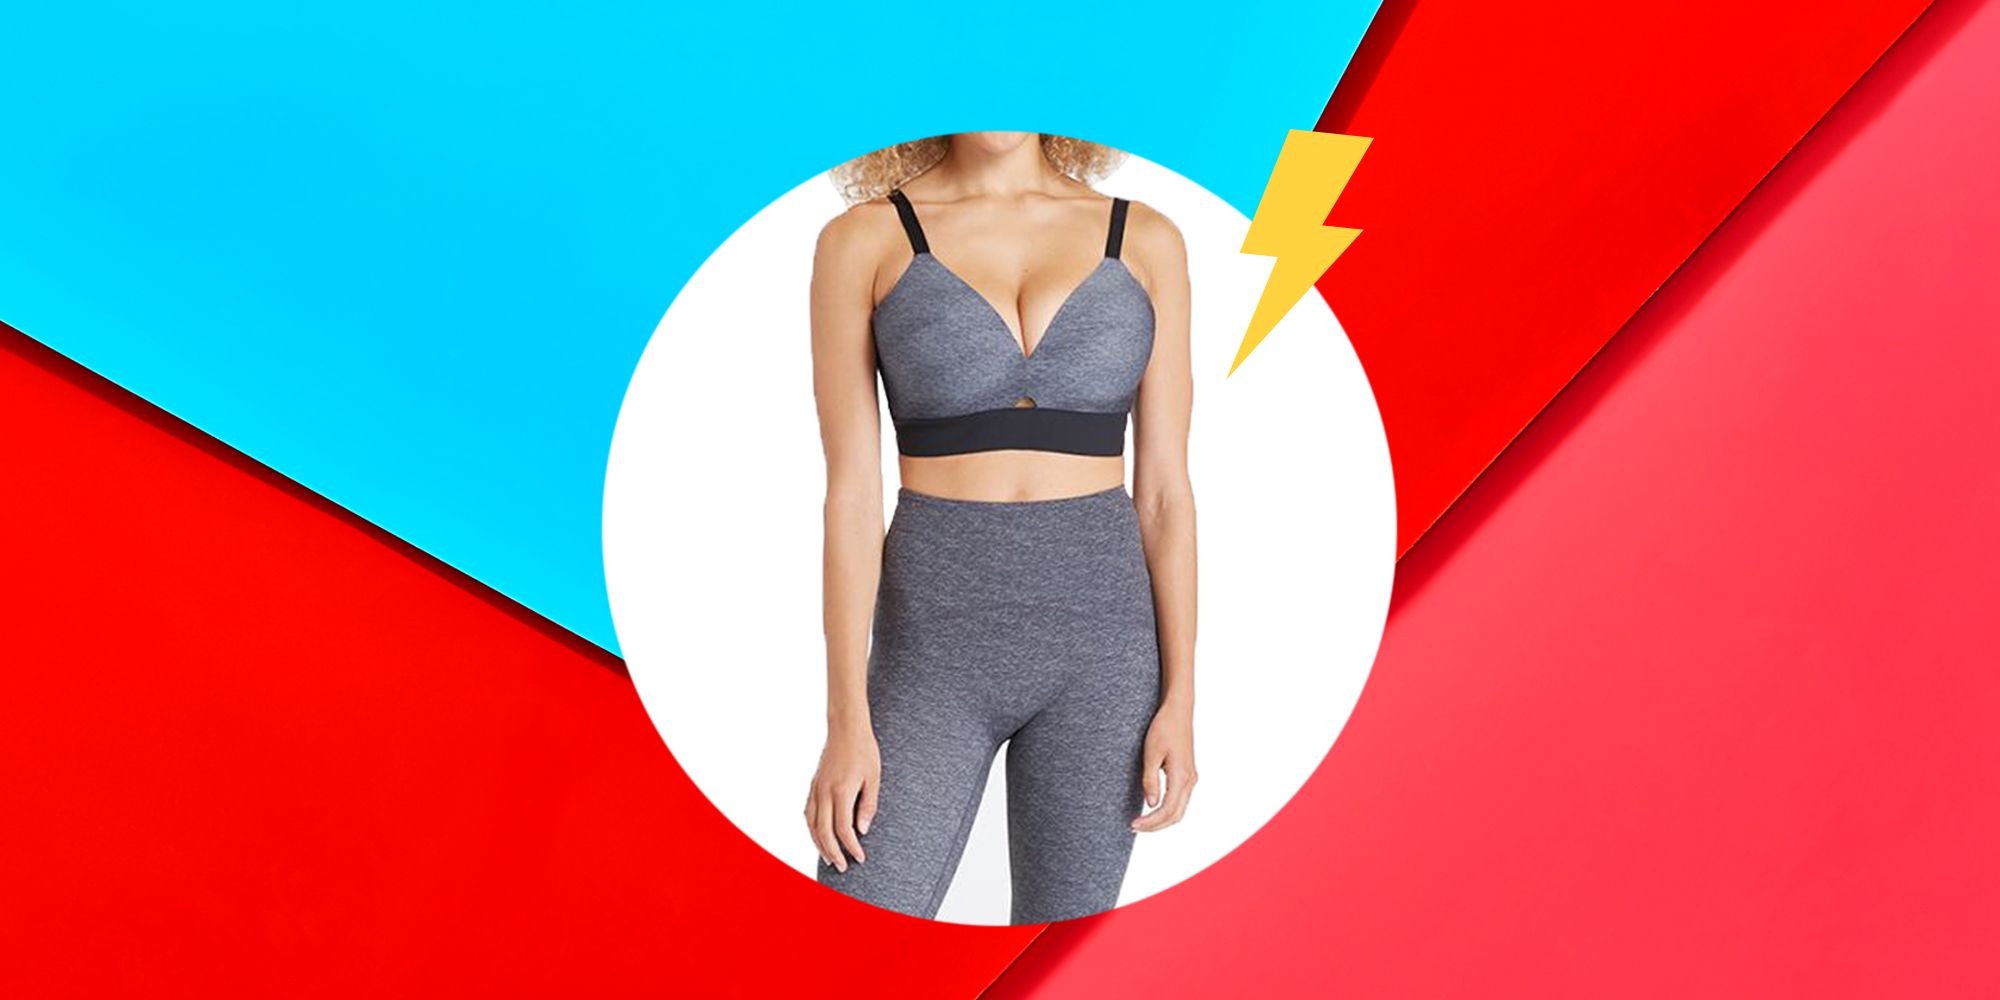 Spanx Flash Sale: Up to 50% Off Leggings, Sports Bras & More